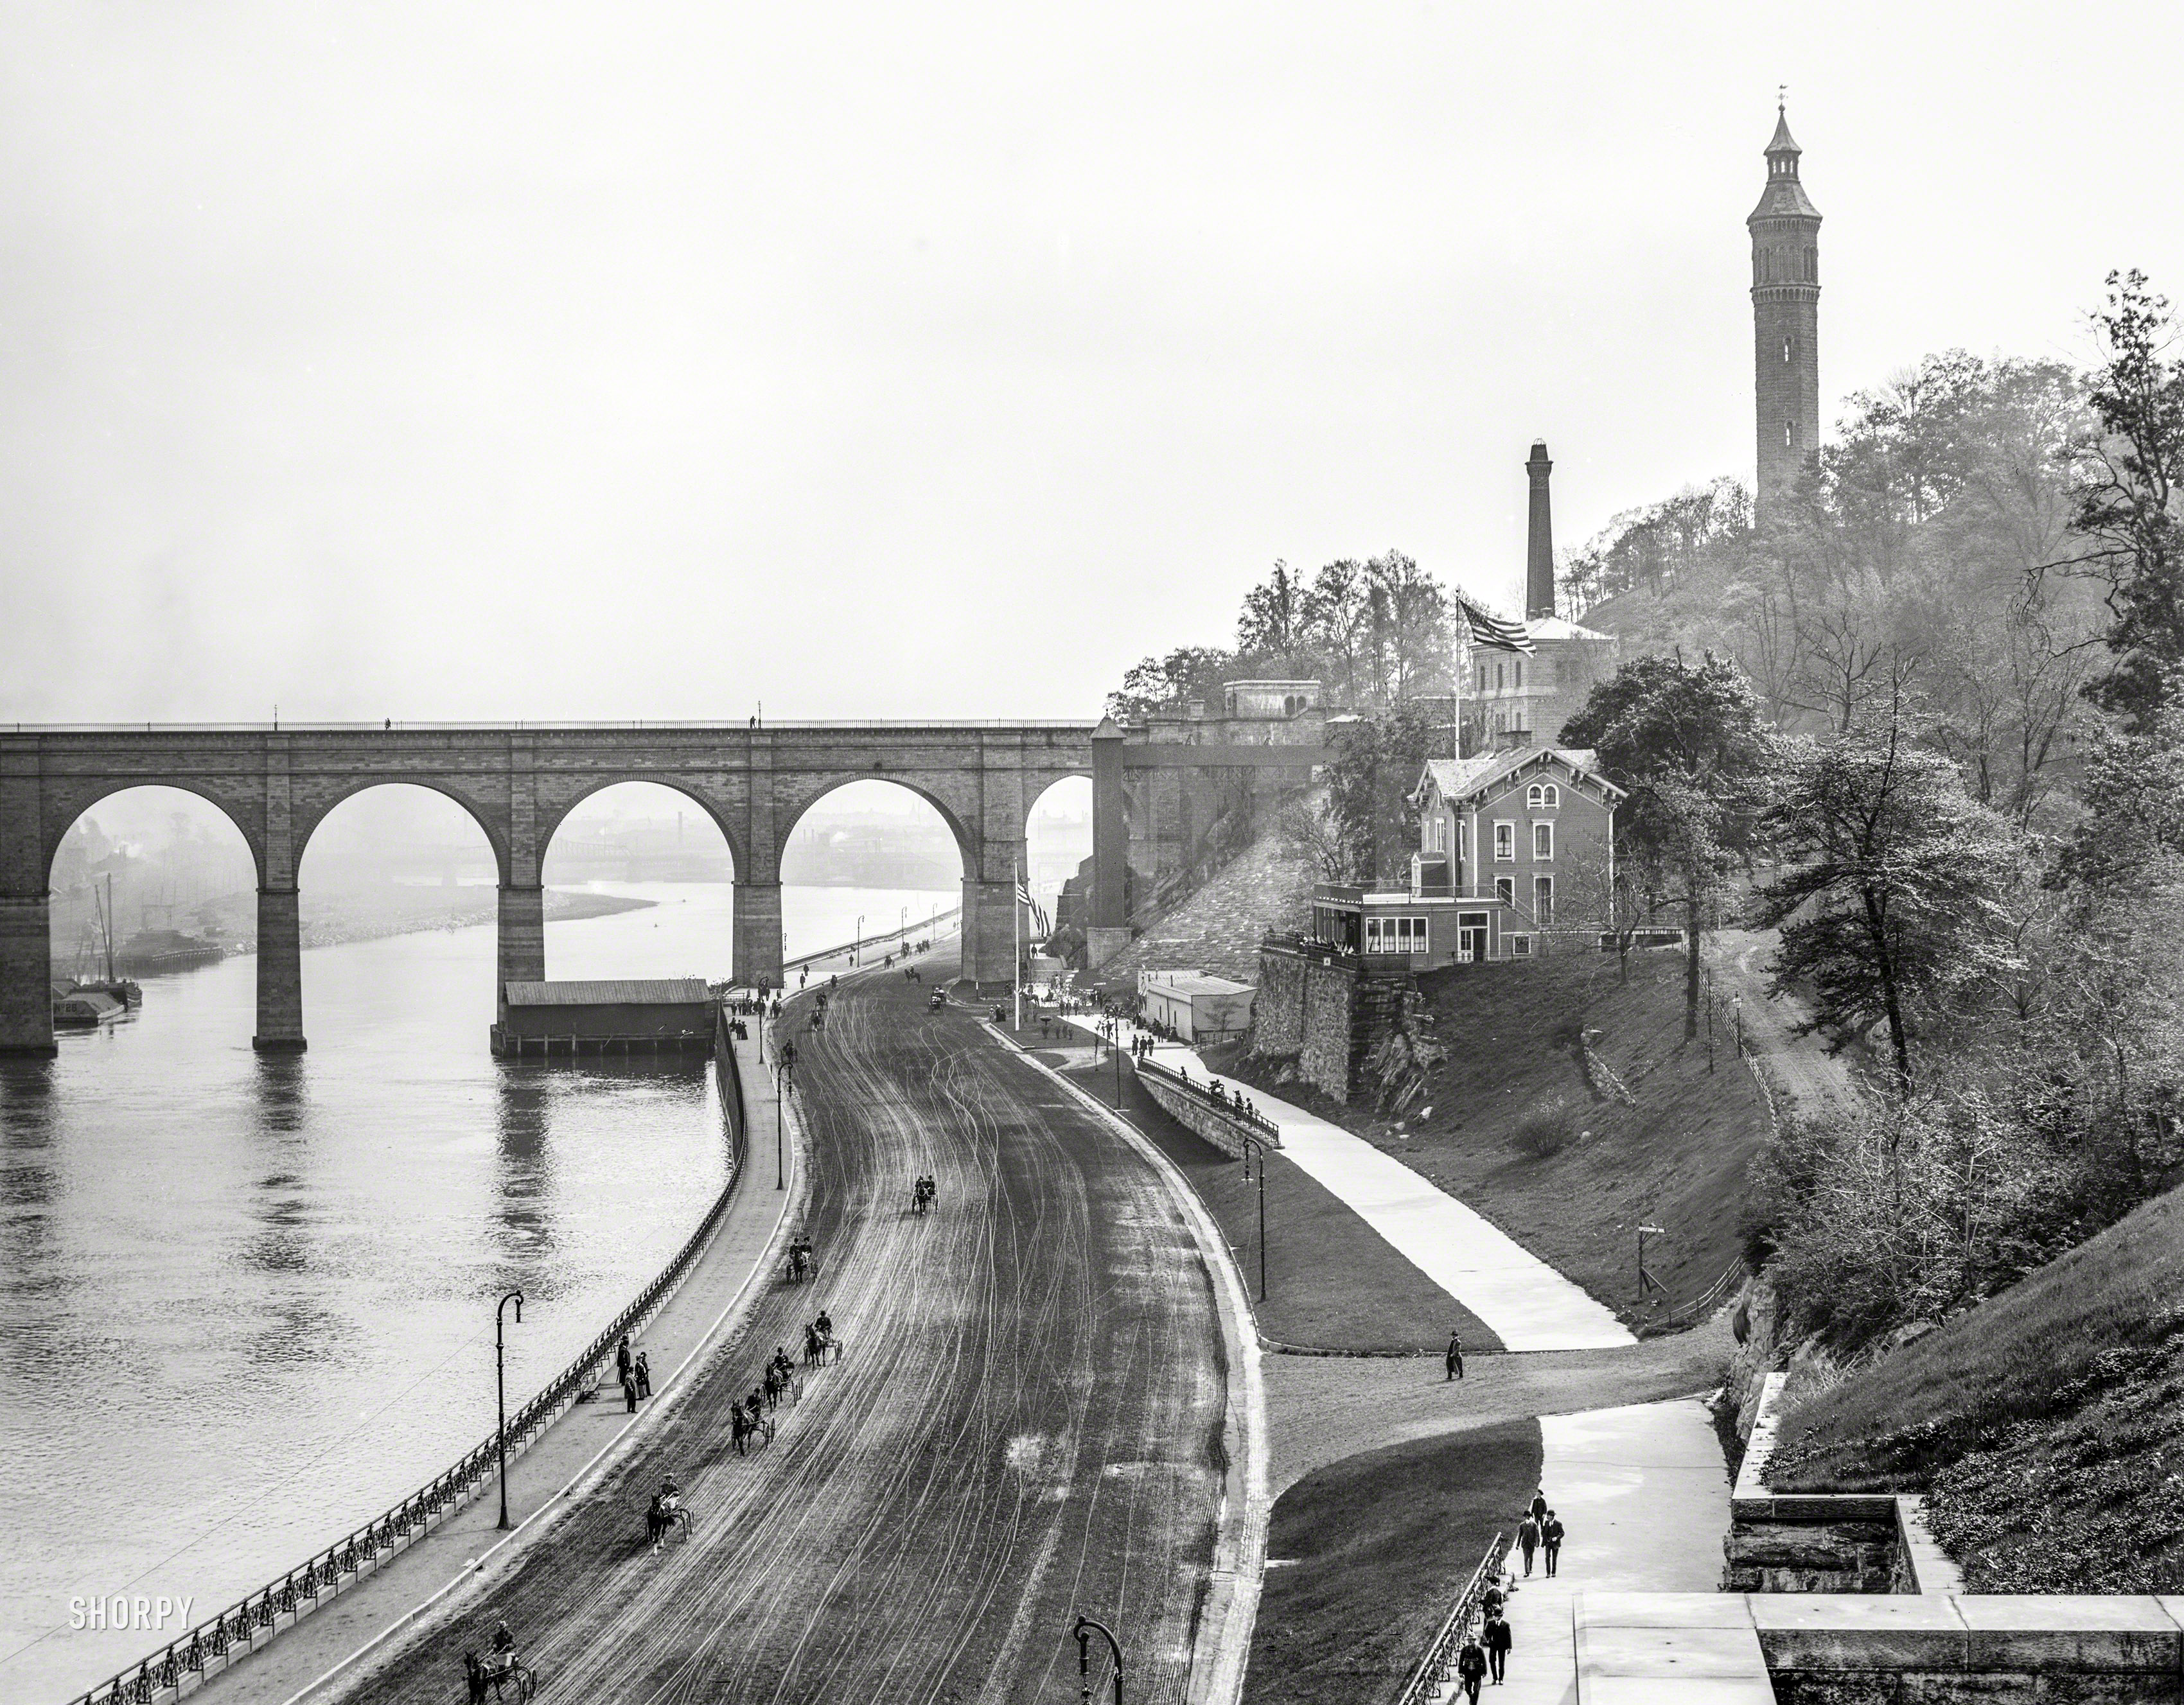 New York circa 1905. "High Bridge and the Speedway looking south." The 1840s aqueduct over the Harlem River, closed since 1970, is reopening next week after a $60 million restoration. 8x10 inch glass negative. View full size.